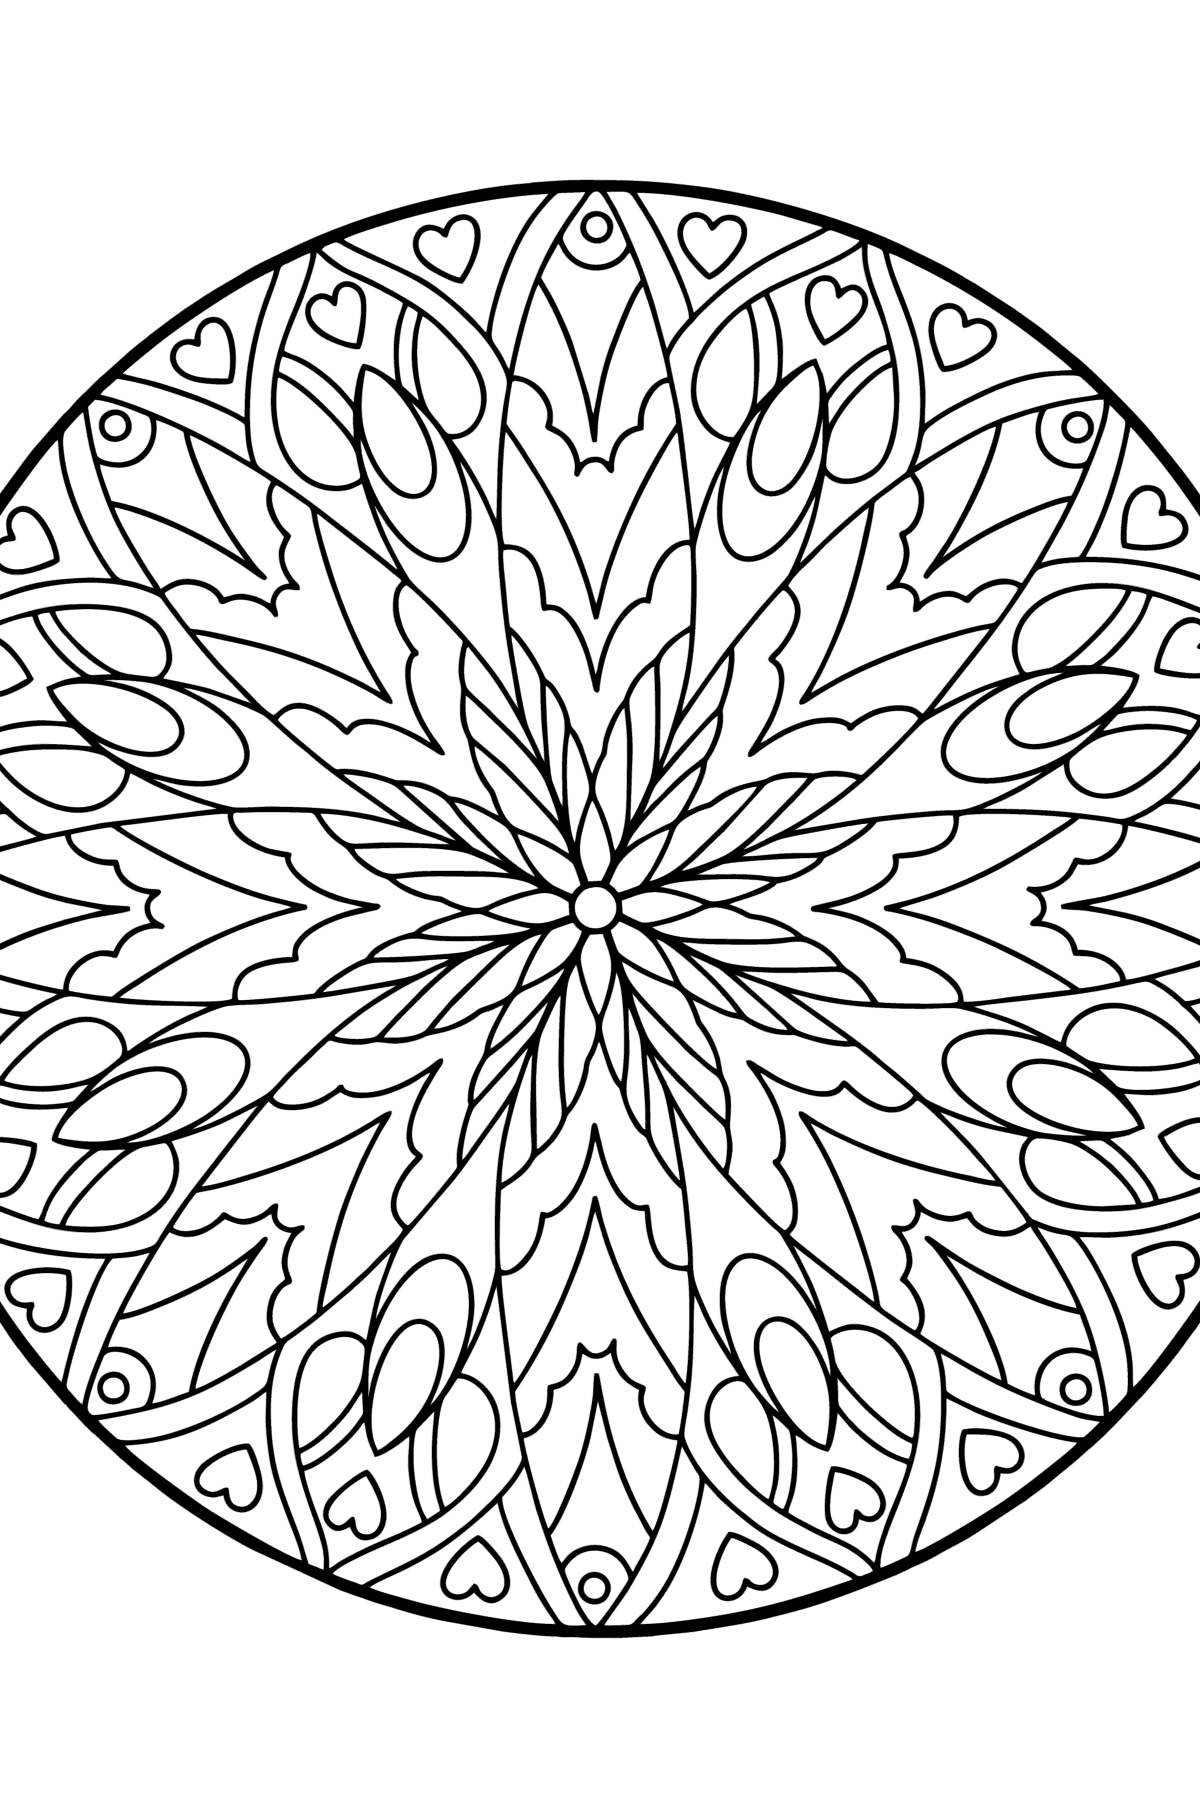 Complex Coloring Page for Kids - Mandala - Coloring Pages for Kids